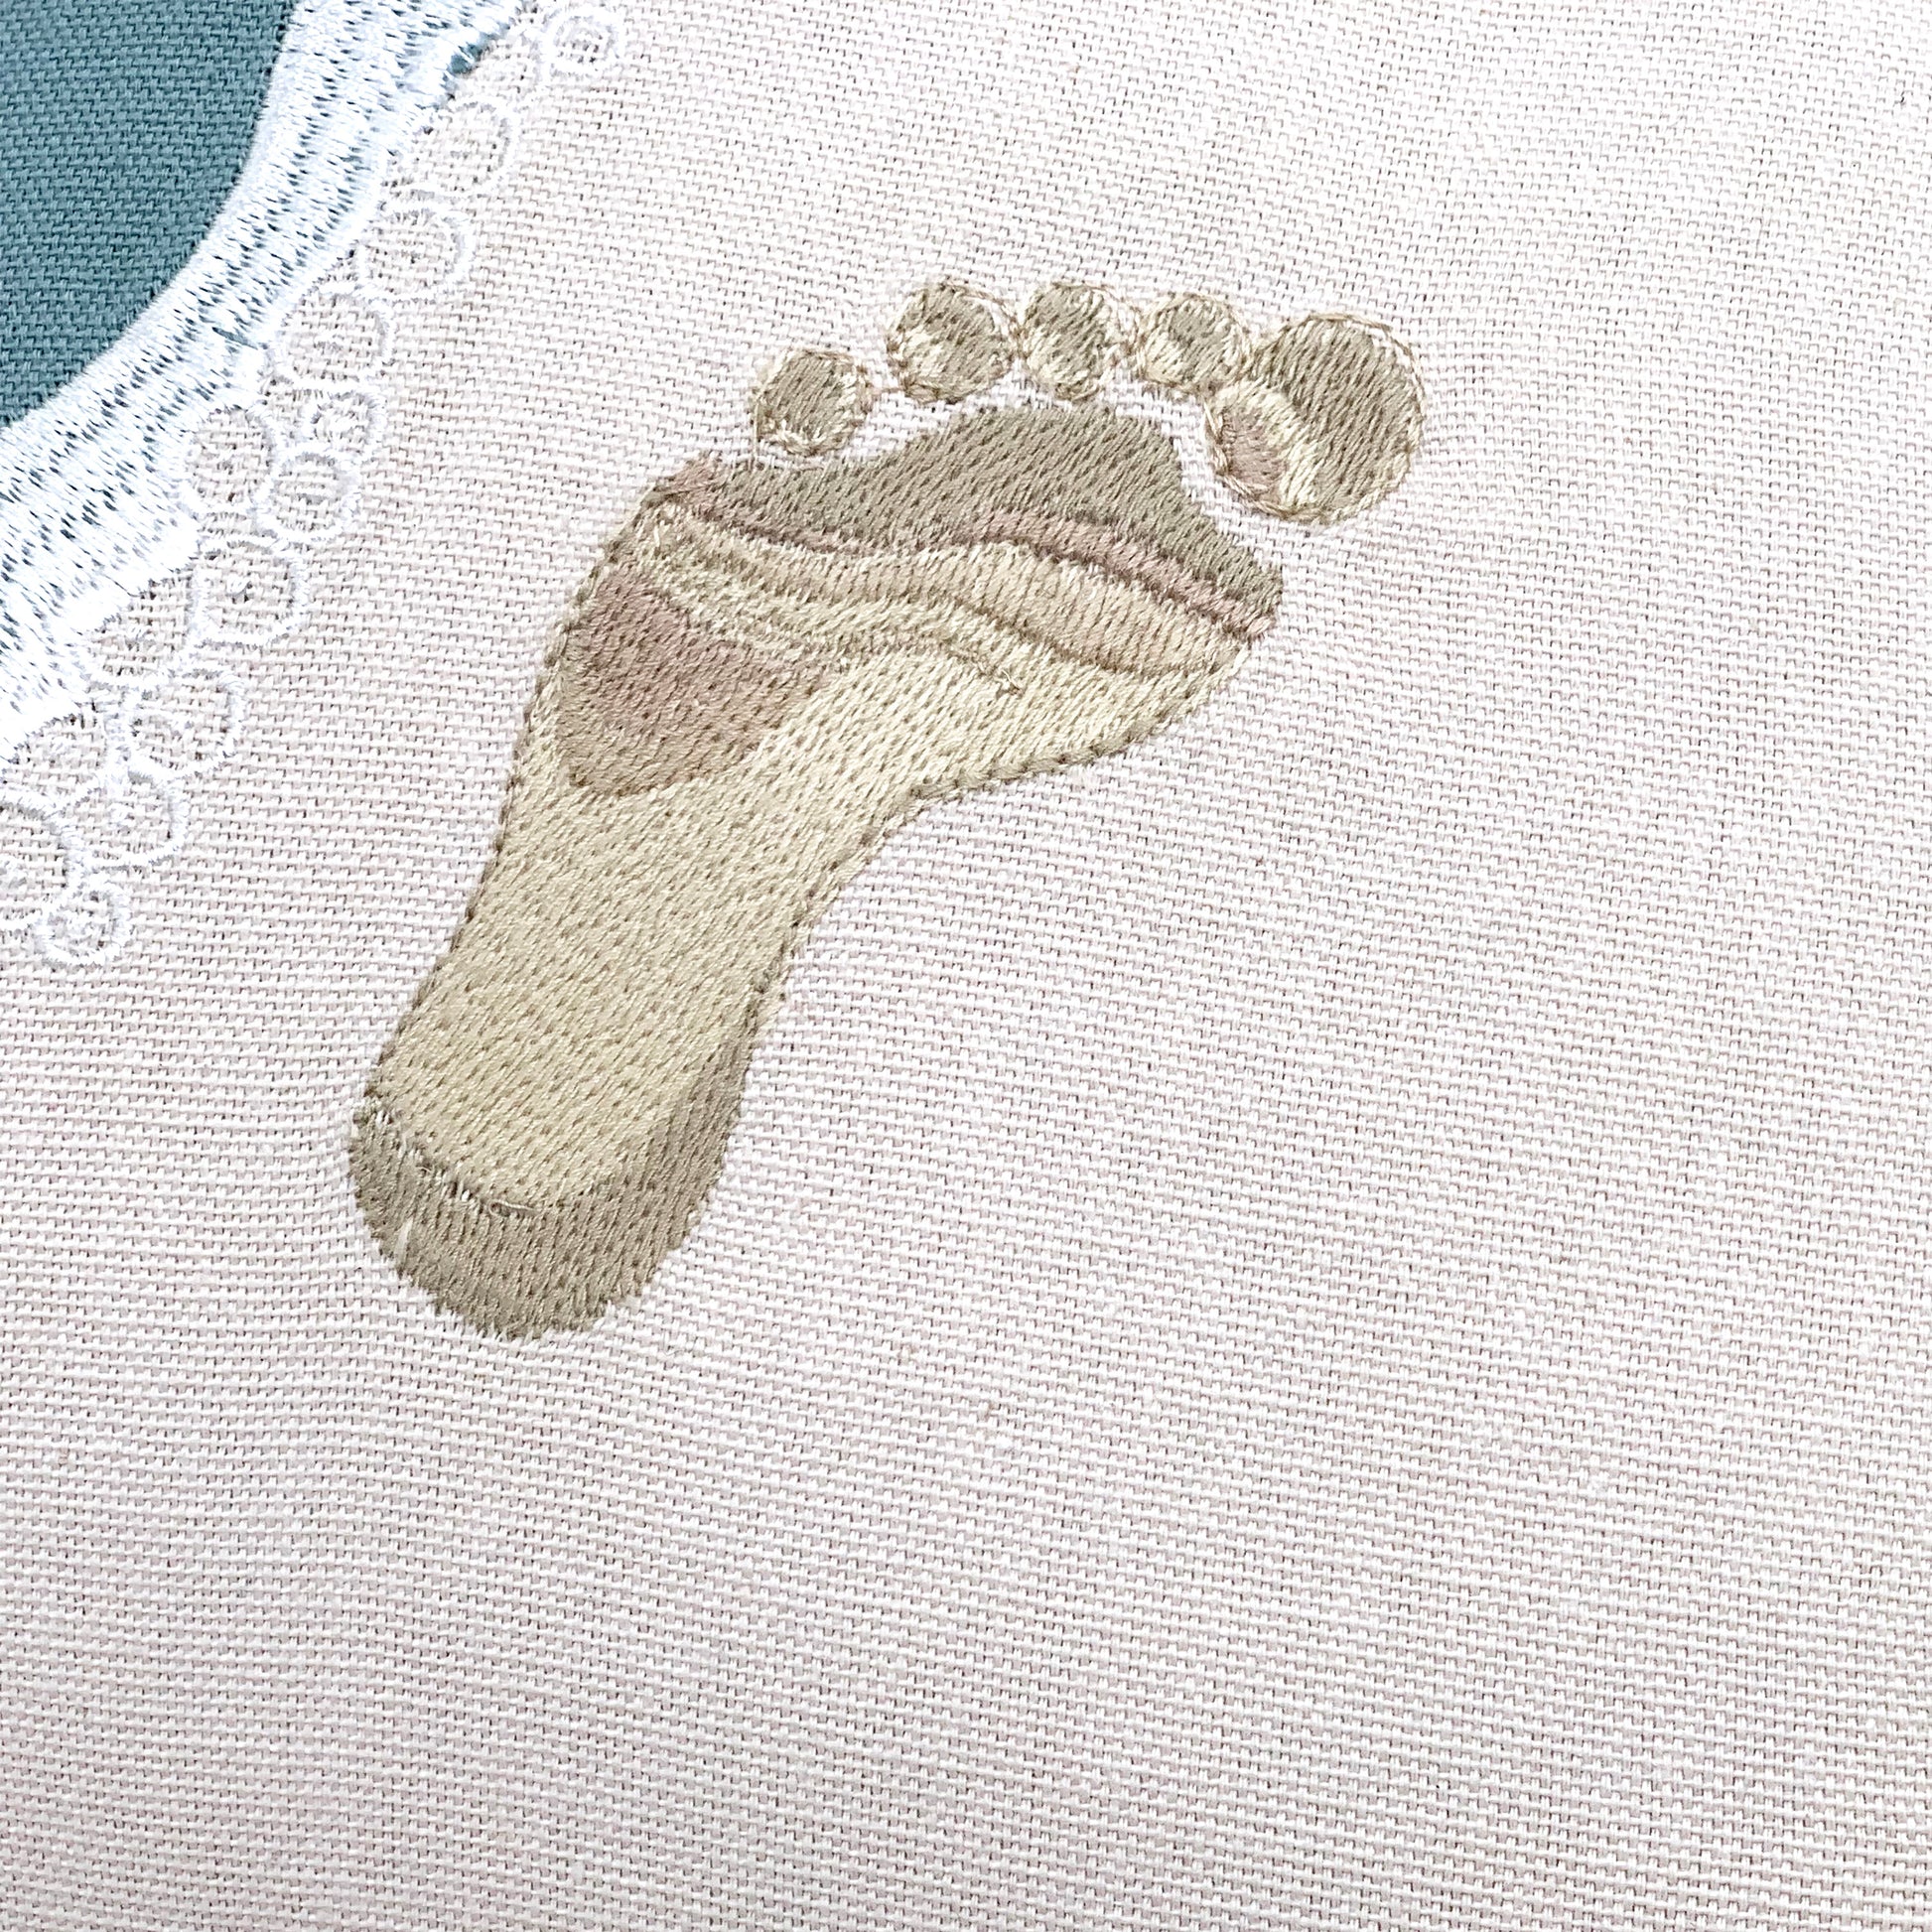 Detail shot of the embroidery work on the Best Friends Footprints Lumbar Pillow.